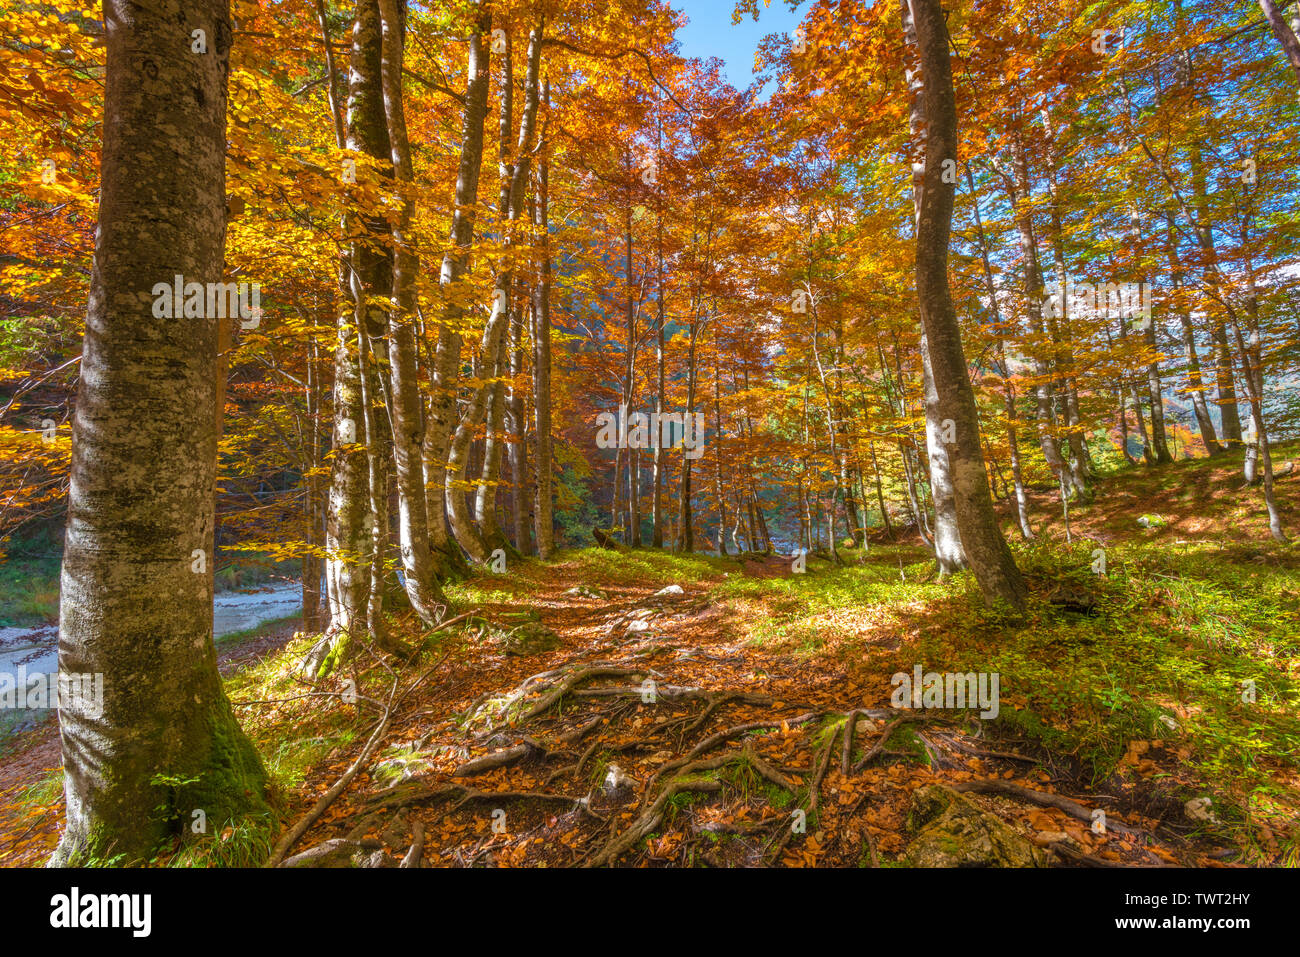 Idyllic hiking trail in the autumn forest near the Soca river in Slovenia. Season change in the woods, spectacular foliage colours. Colorful trees. Stock Photo